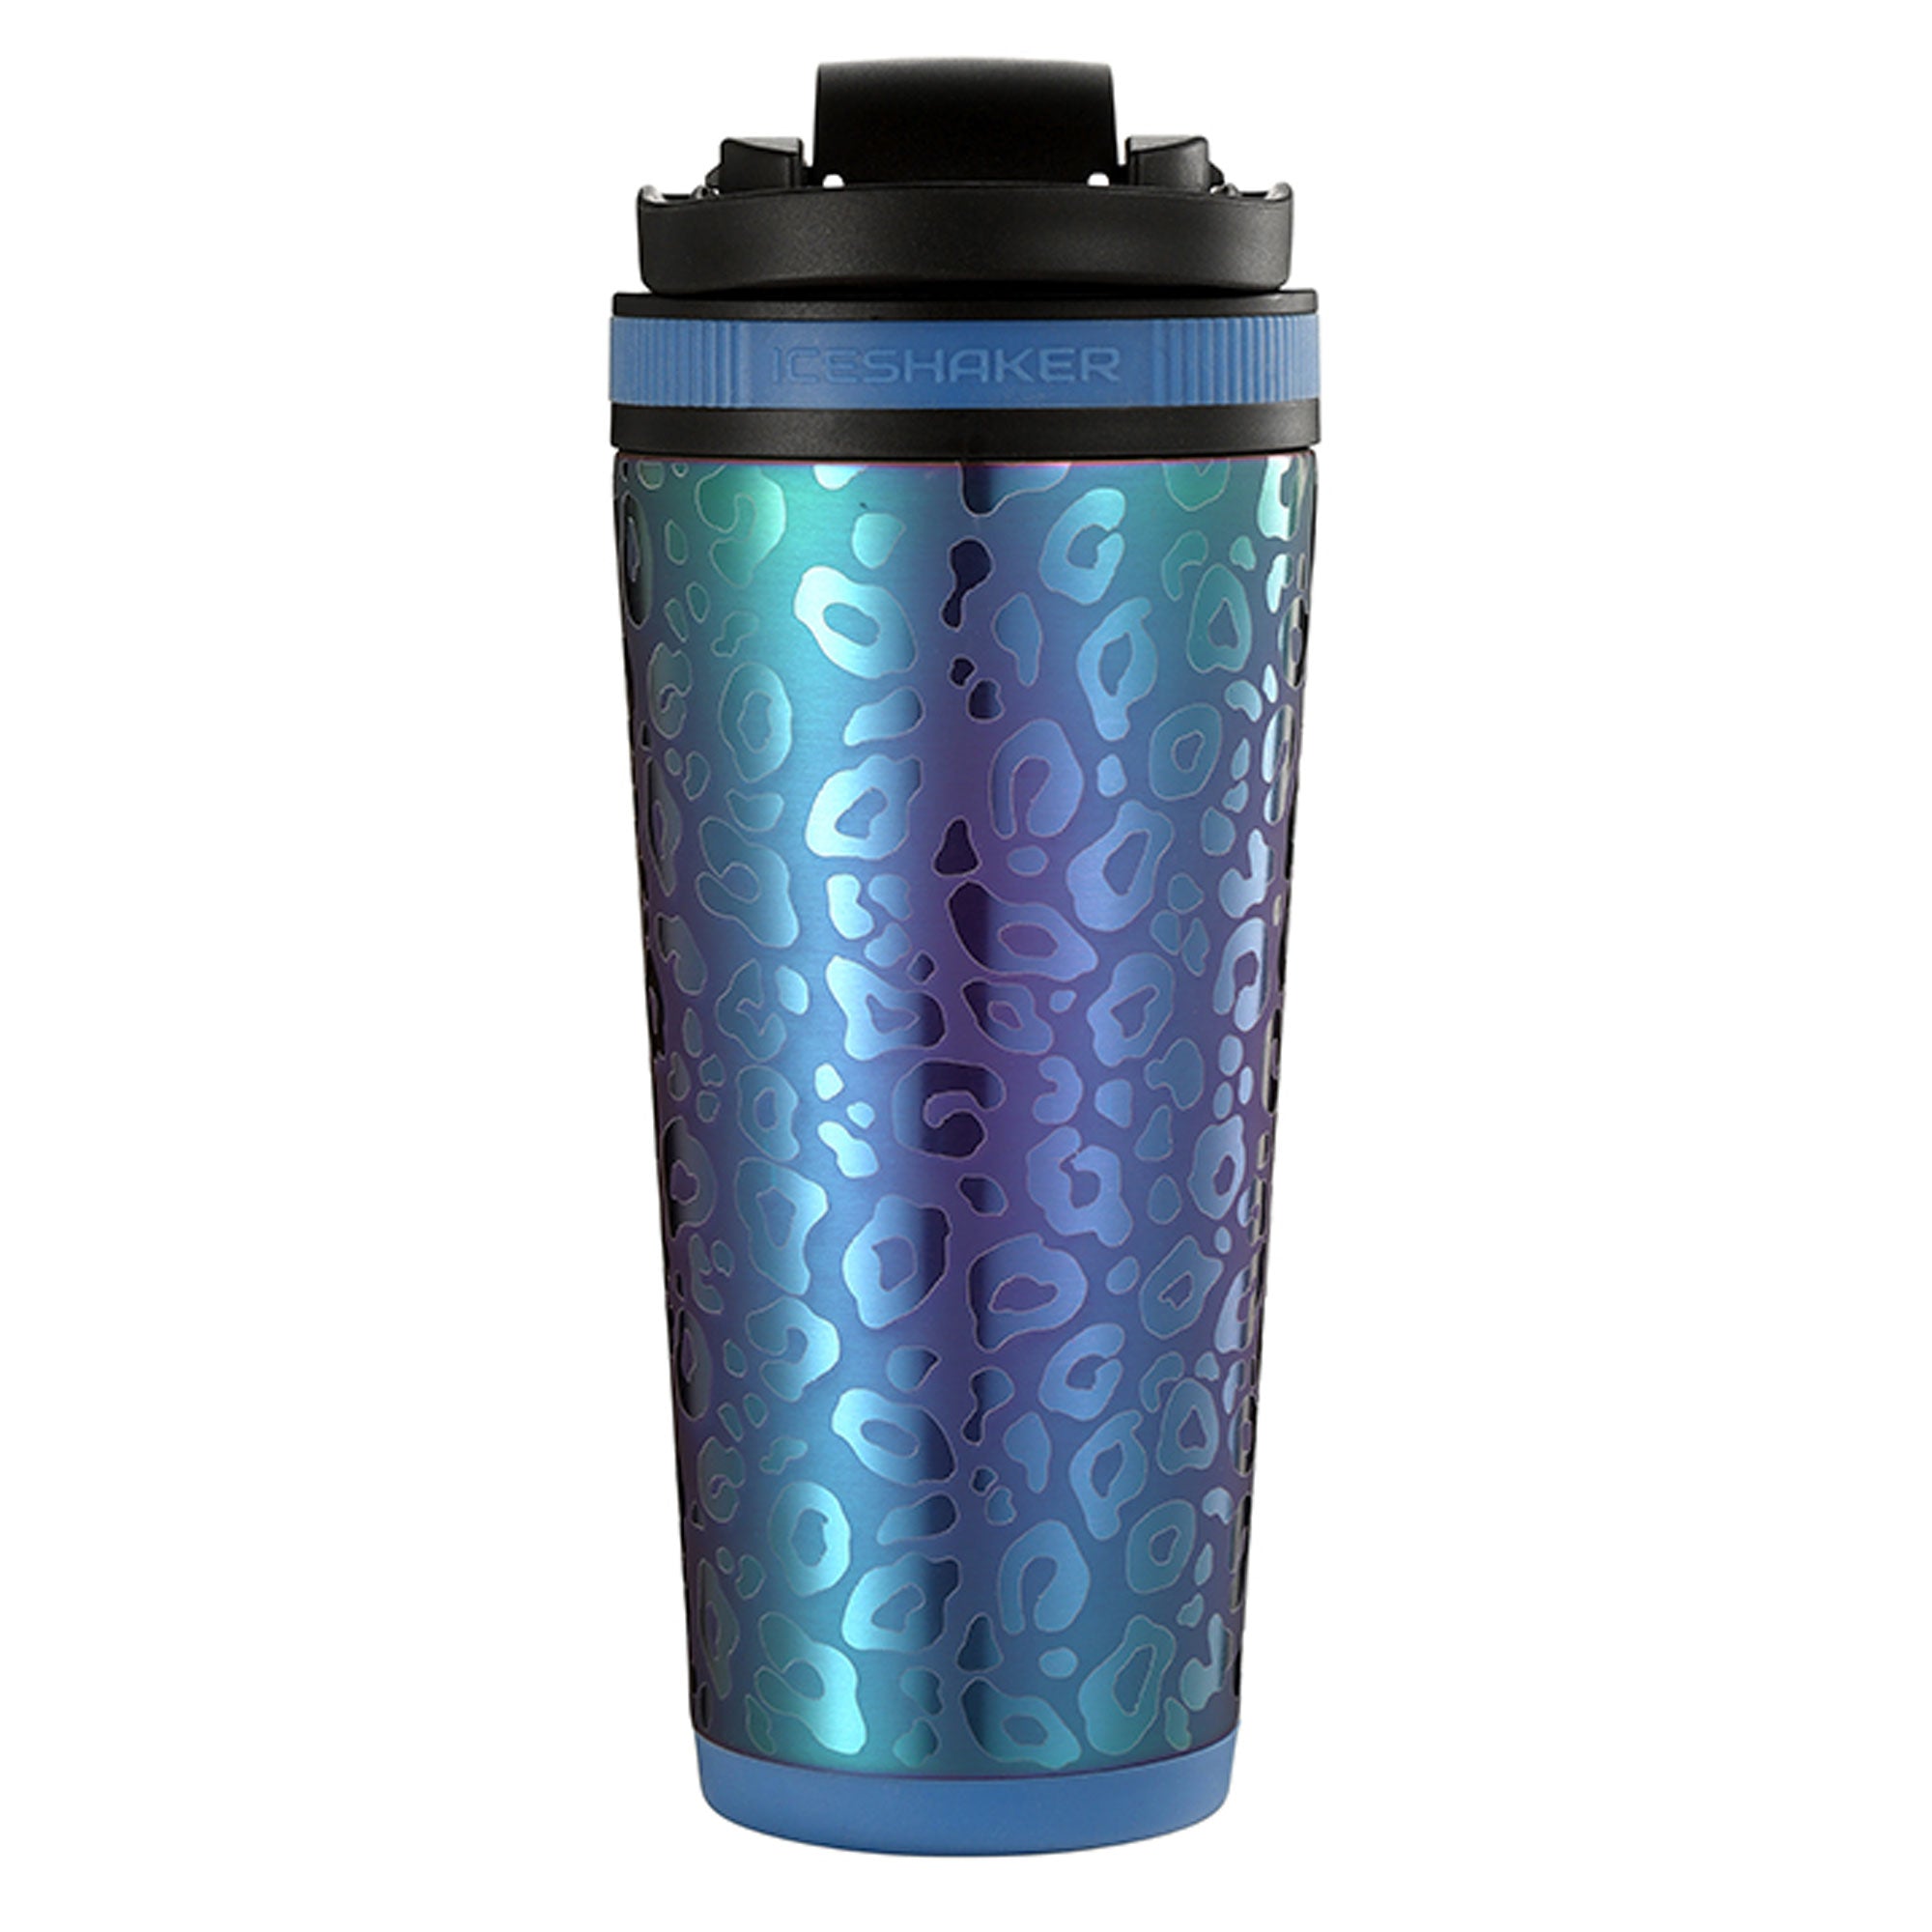 26oz Golf Series Ice Shaker Insulated Bottle - Pimento Cheese